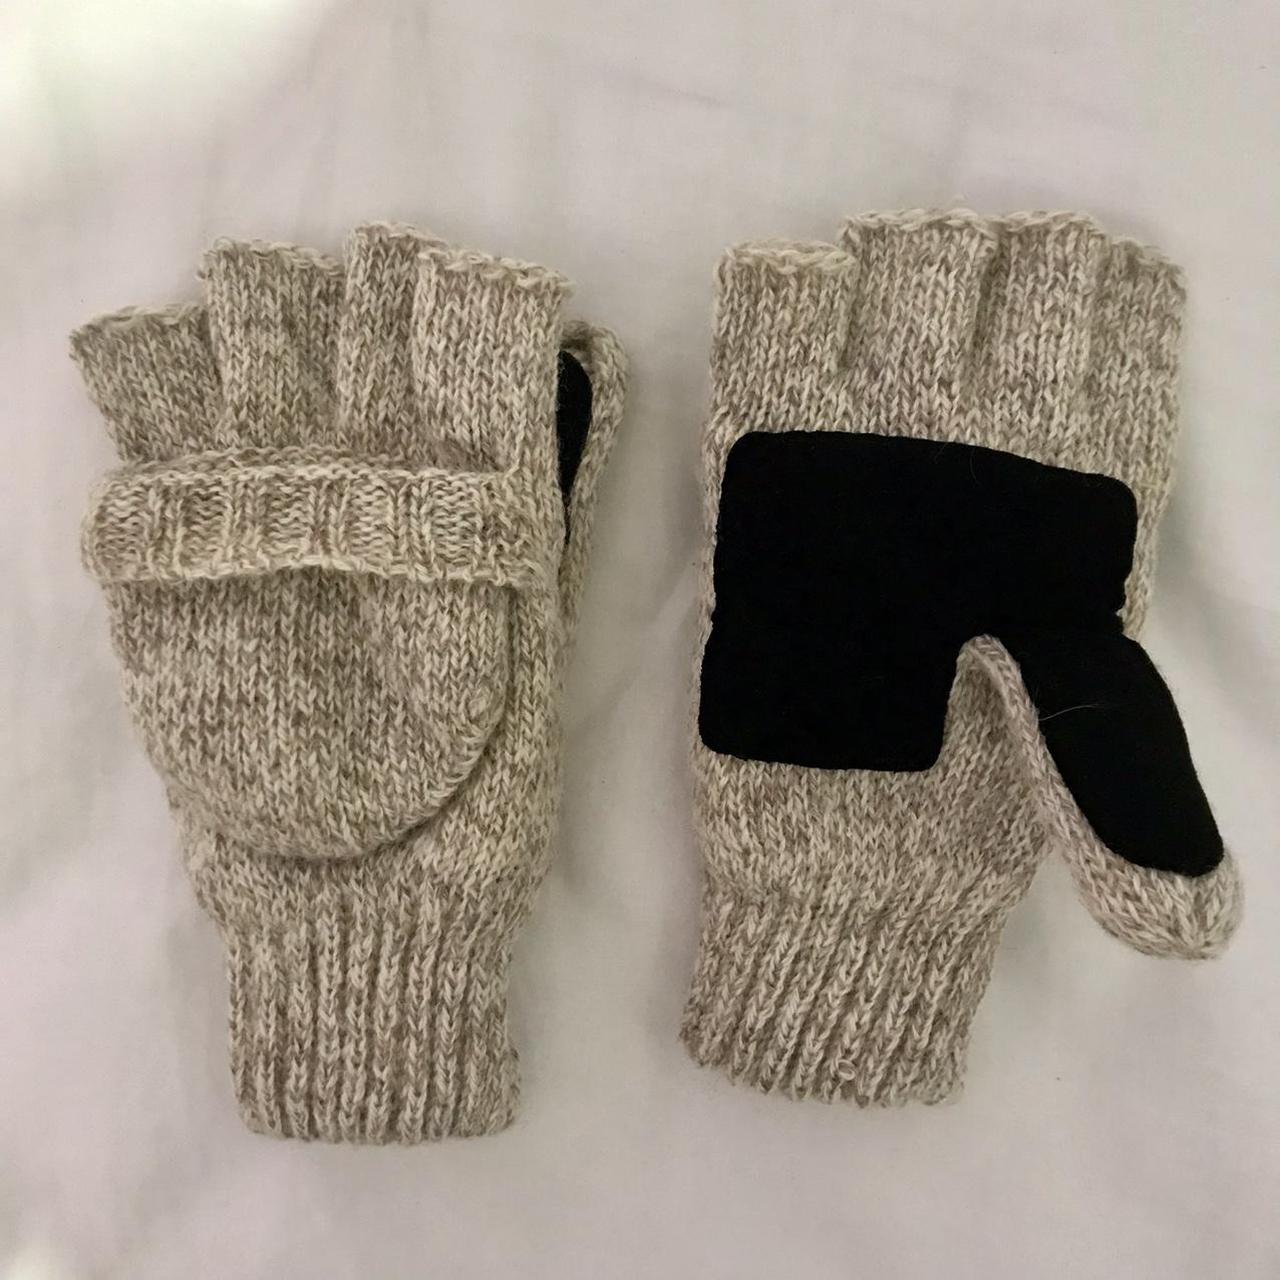 Product Image 2 - Beige winter mittens/gloves
You can wear